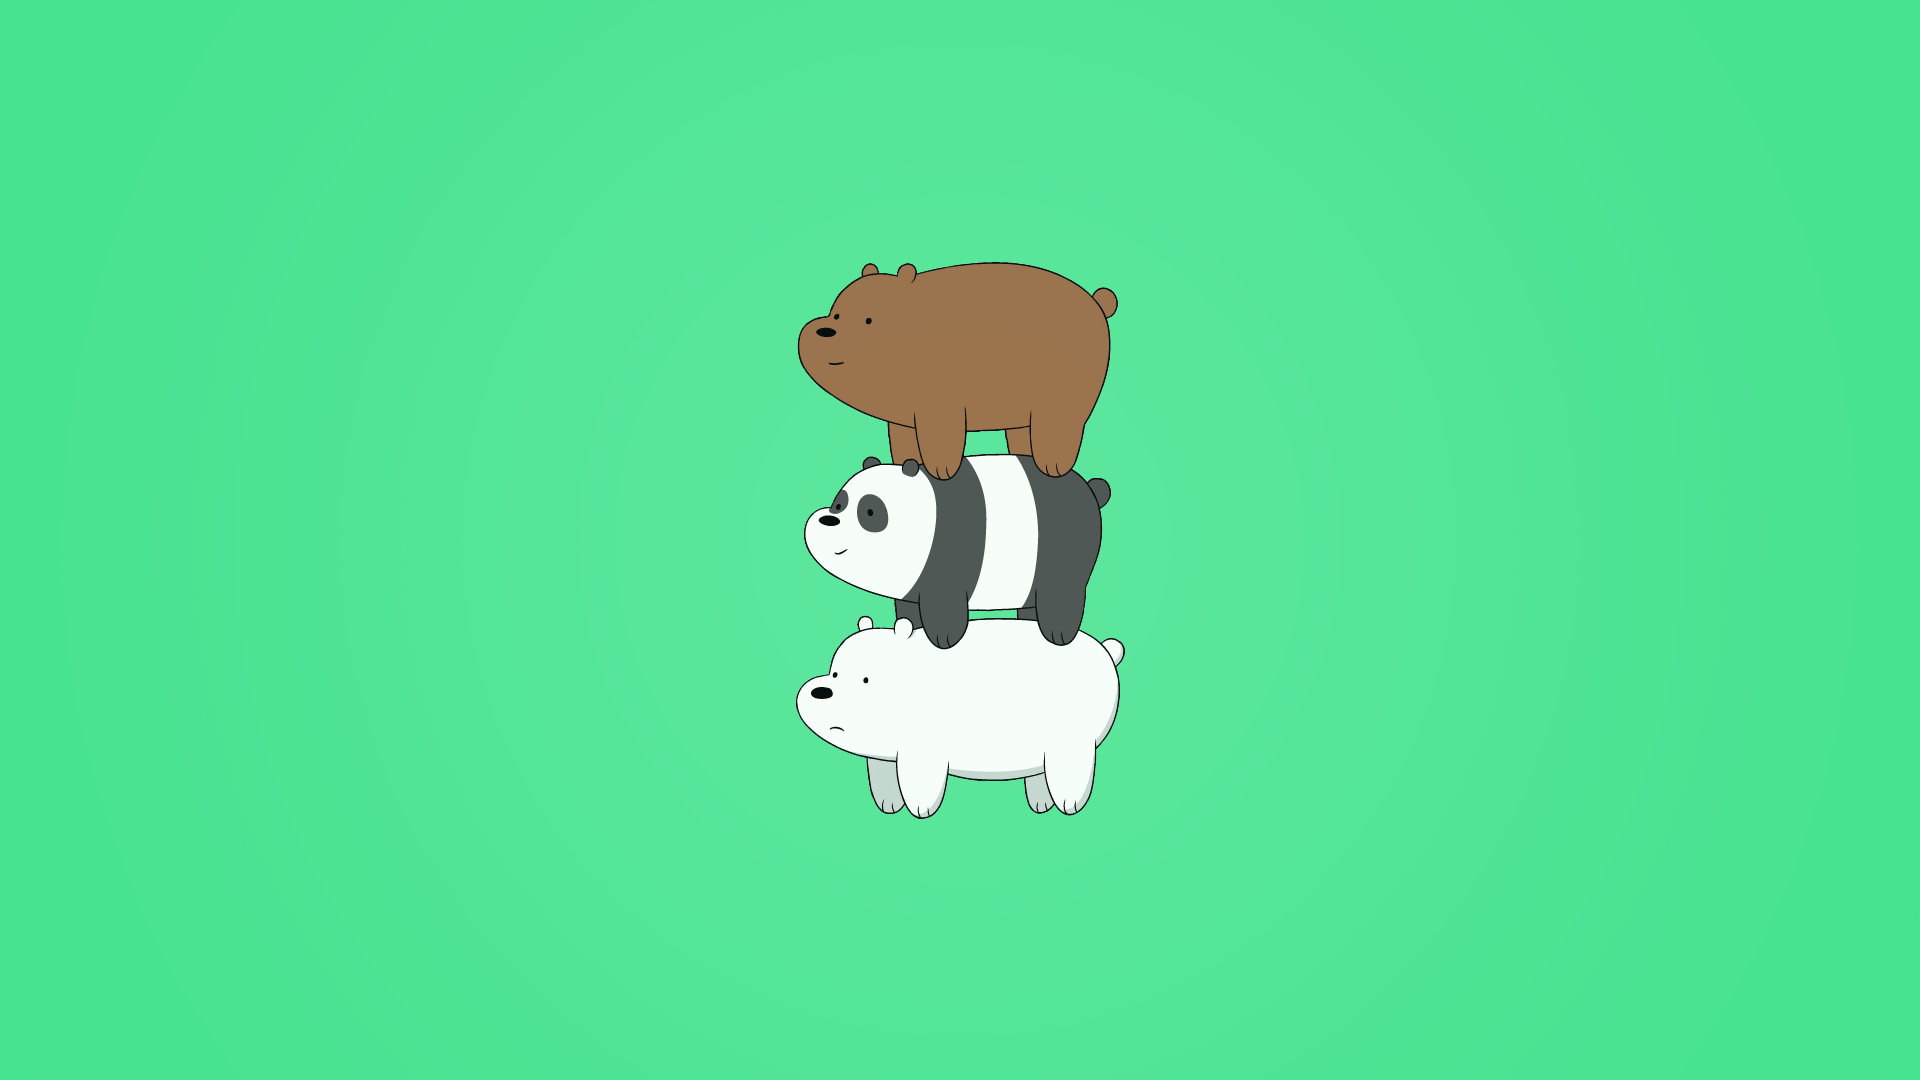 Bearstack wallpaper (Variations in comments)